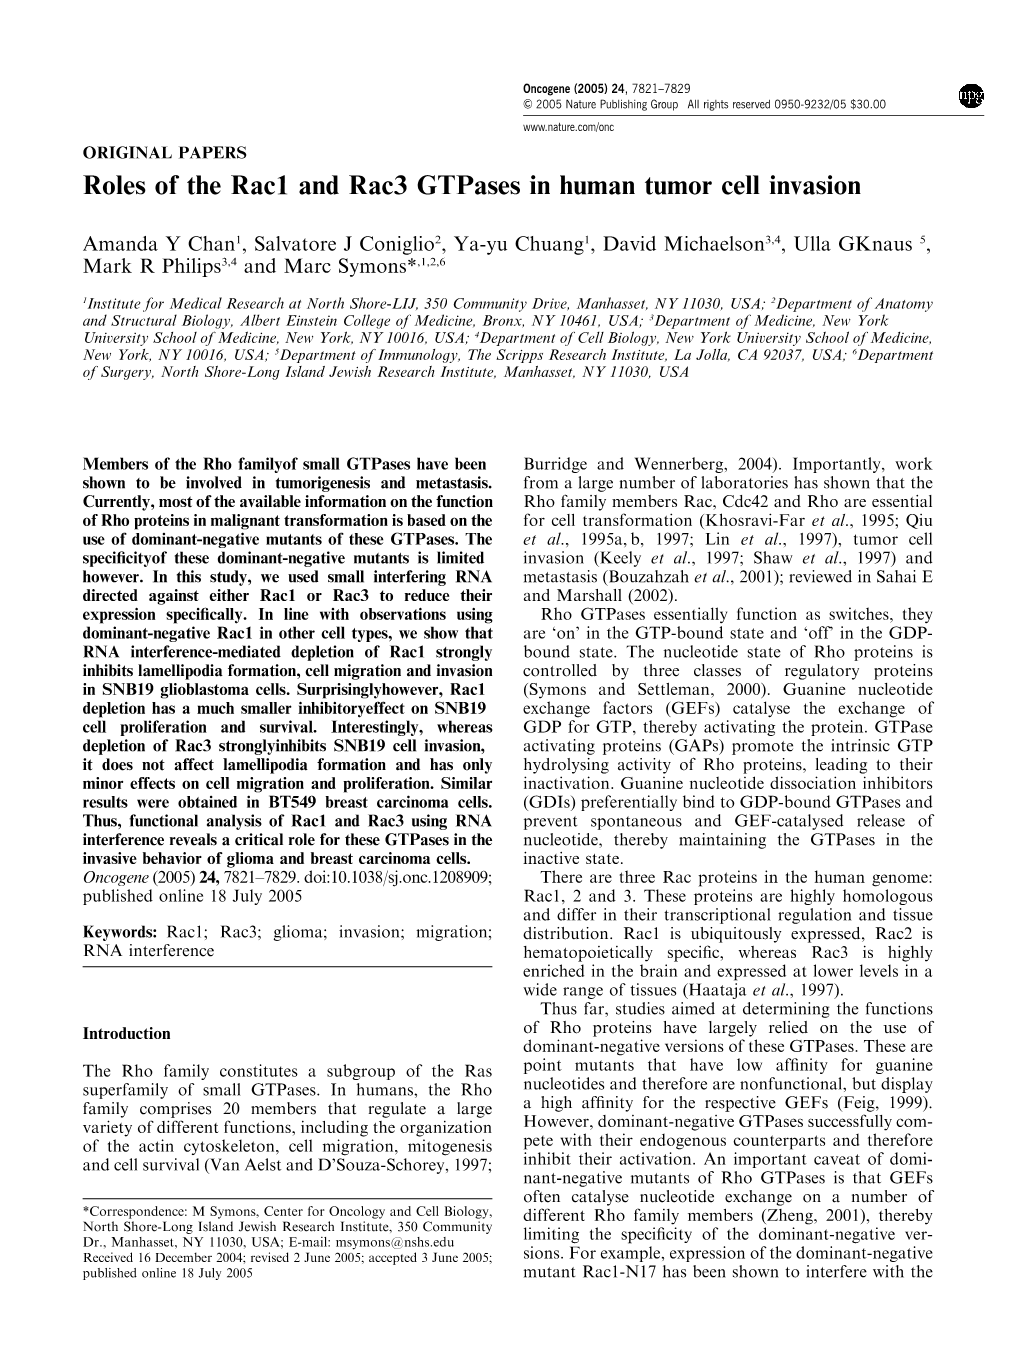 Roles of the Rac1 and Rac3 Gtpases in Human Tumor Cell Invasion